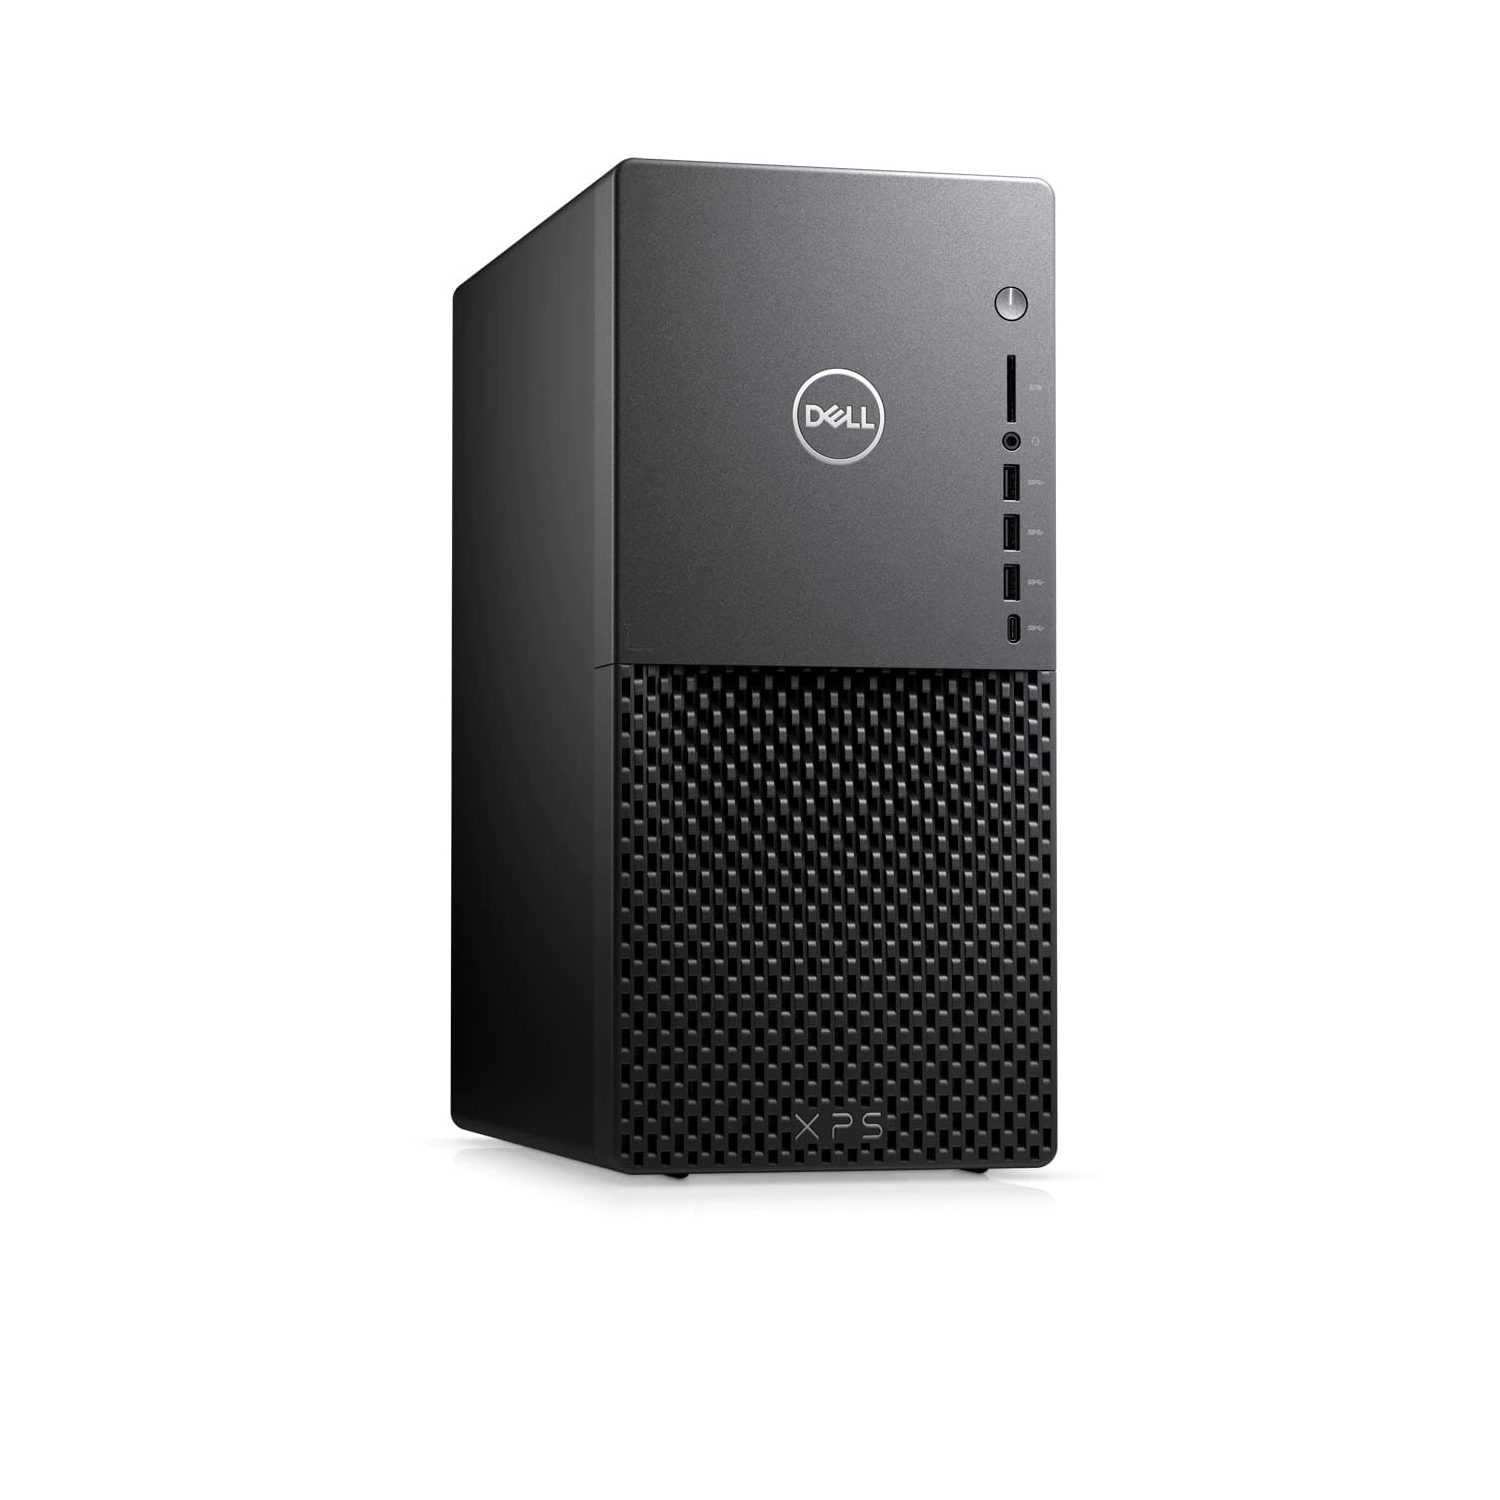 Refurbished (Excellent) - Dell XPS 8940 Desktop (2020) | Core i7 - 512GB SSD - 16GB RAM | 8 Cores @ 4.9 GHz - 11th Gen CPU Certified Refurbished